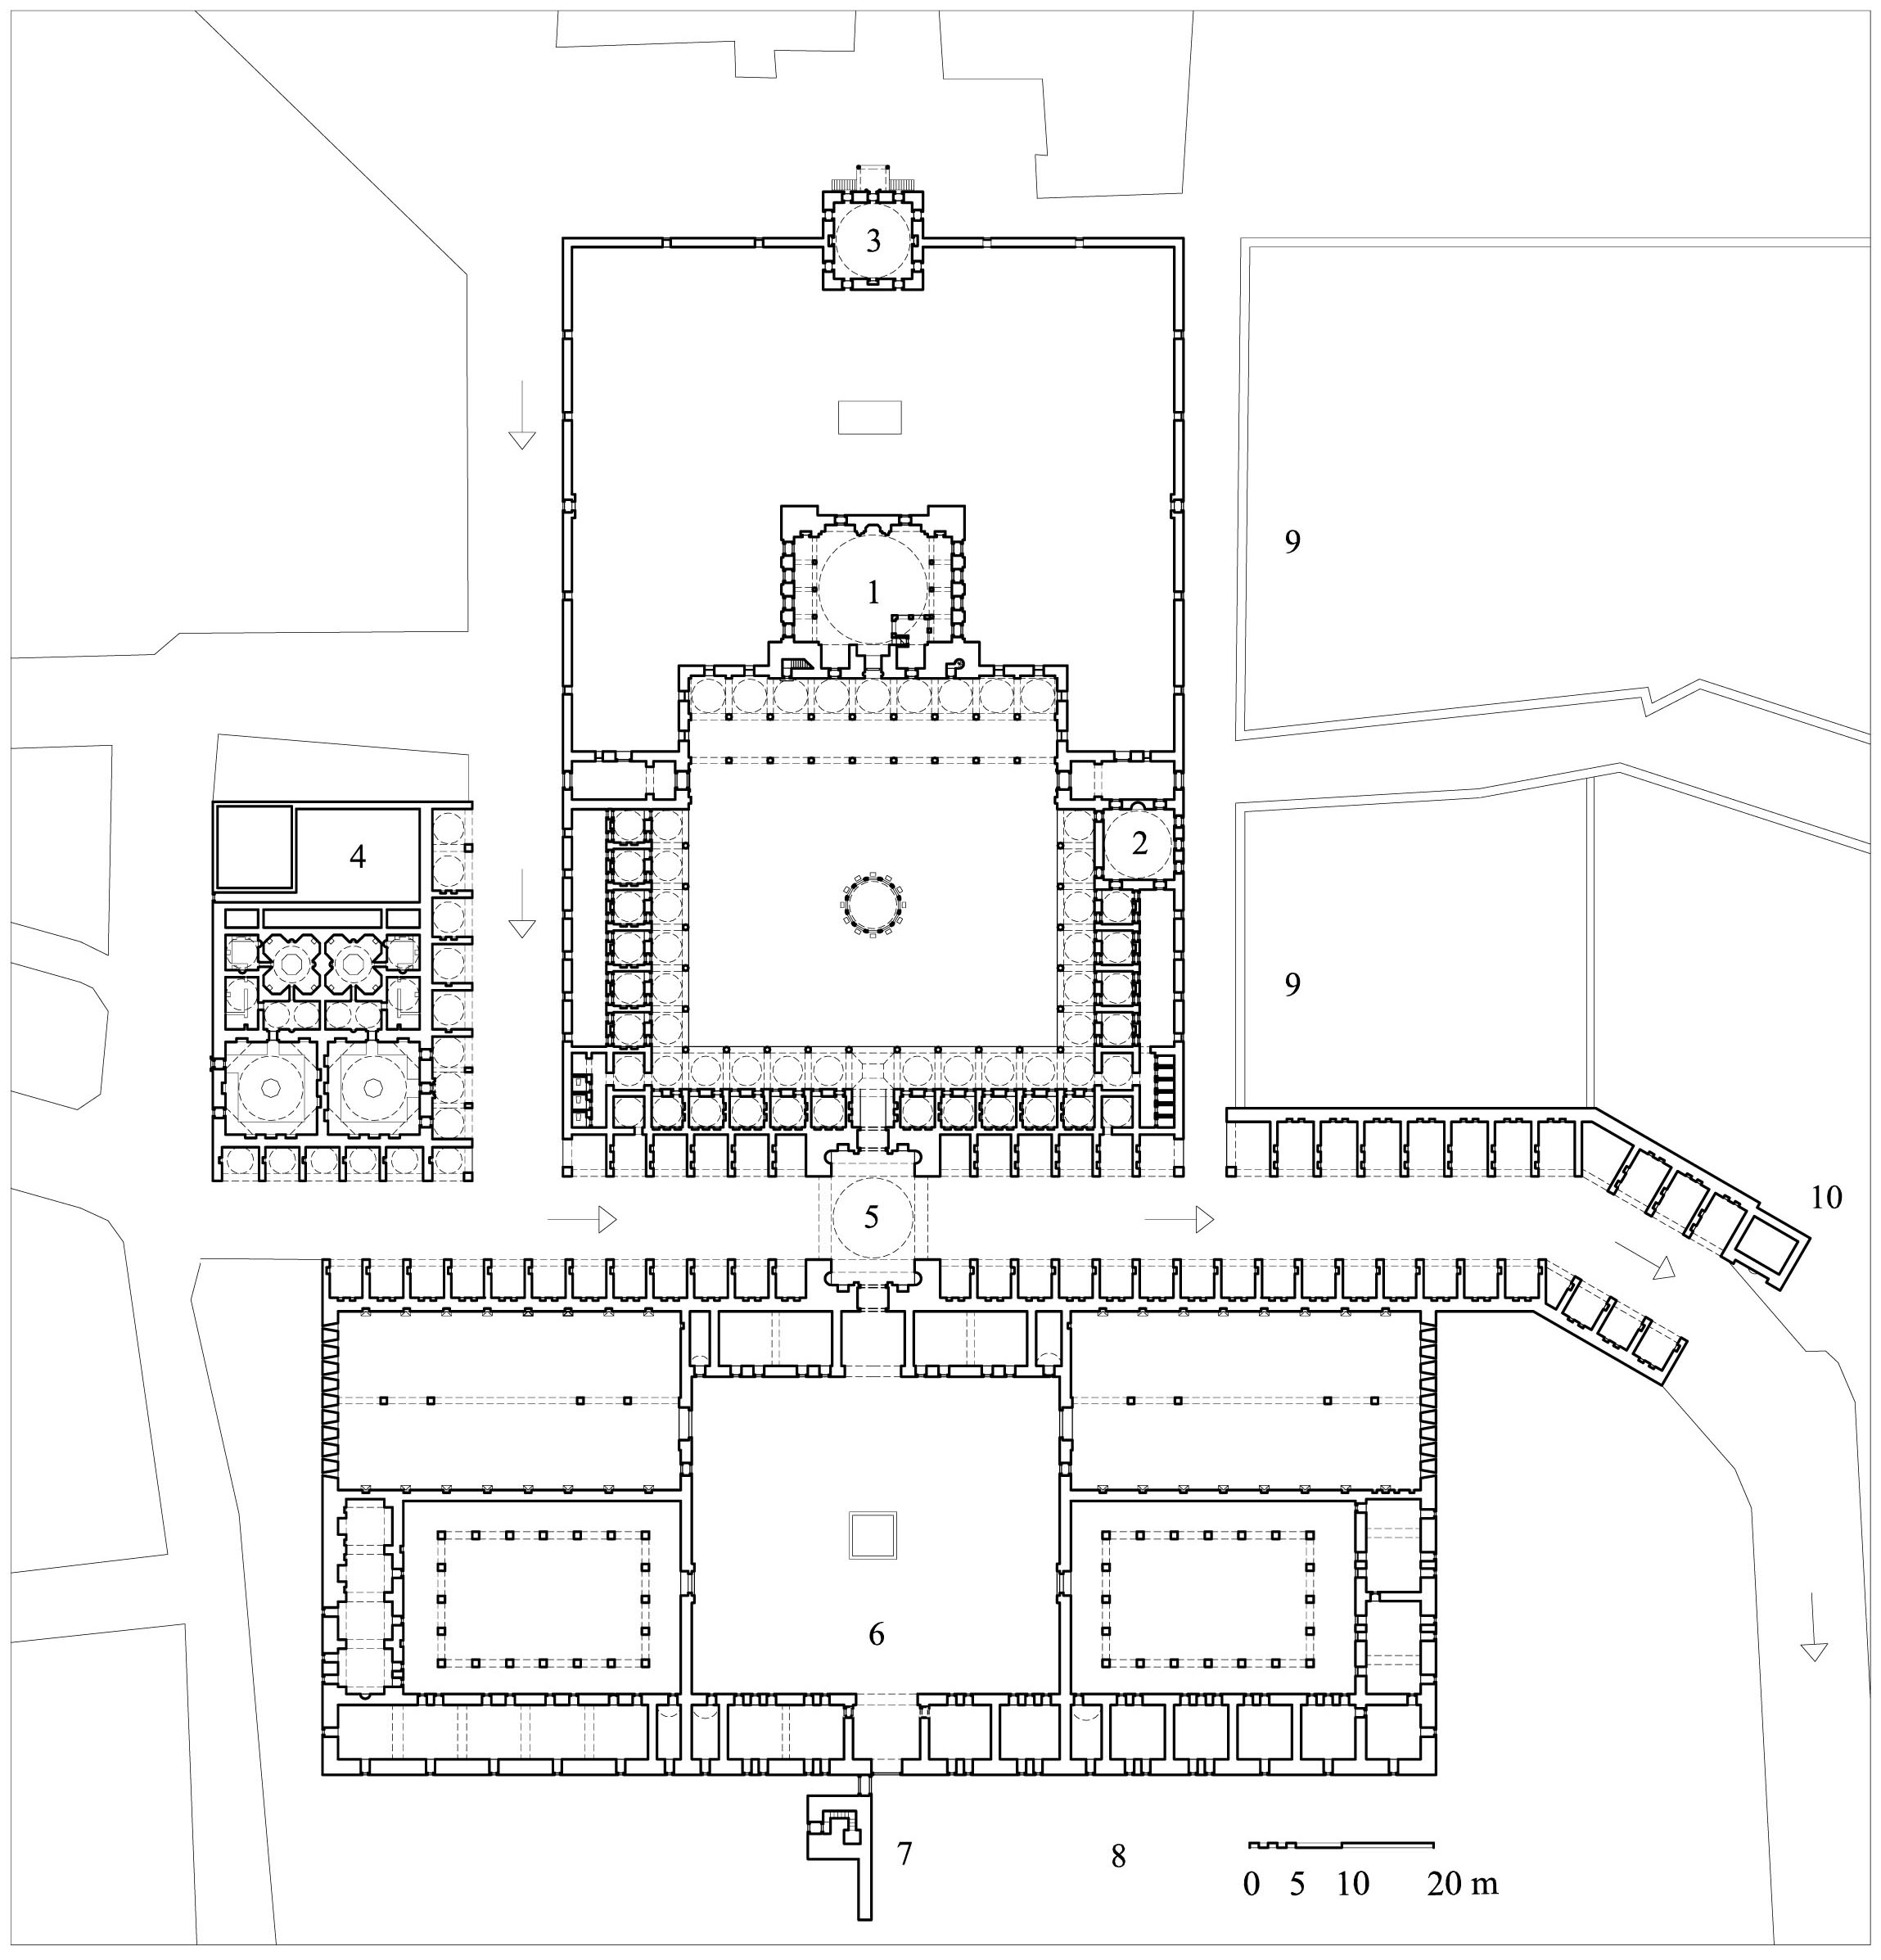 Sokollu Mehmet Paşa Külliyesi - Floor plan of the complex, showing  (1) mosque, (2) madrasa, (3) elementary school, (4) double bath, (5) prayer dome, (6) double caravanserai with guestrooms and hospice (hypothetical reconstruction), (7) watchtower of waqf administrator's residence, (8) site of royal palace, (9) residences for the professor, preacher, imam and four muezzins, (10) public fountain and route toward the bridge.  Arrows designate the road between Istanbul and Edirne. DWG file in AutoCAD 2000 format. Click the download button to download a zipped file containing the .dwg file.